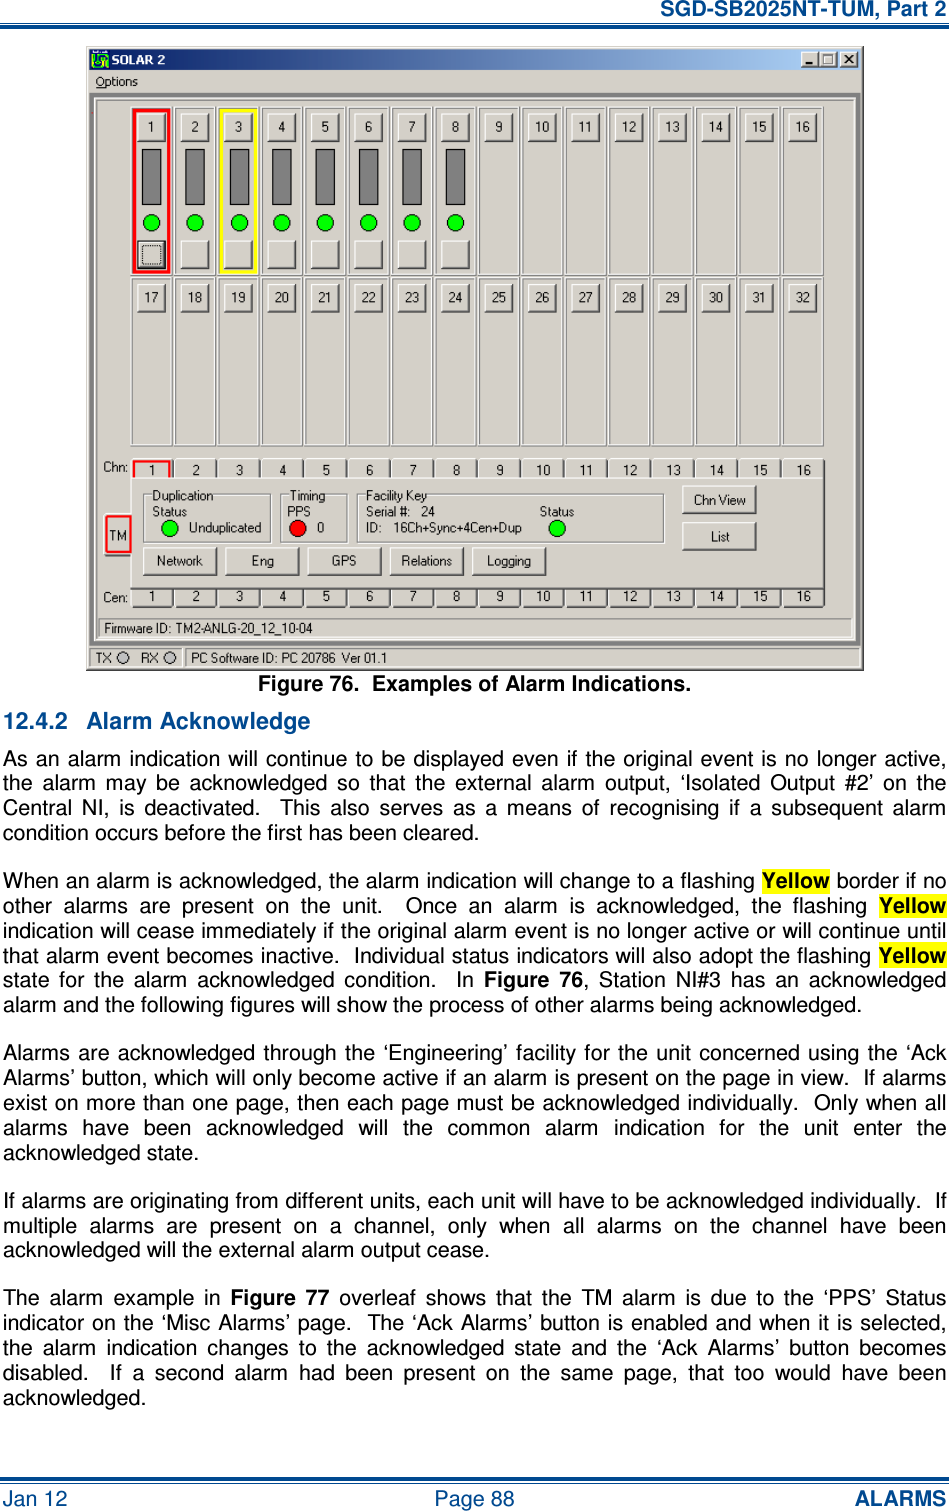   SGD-SB2025NT-TUM, Part 2 Jan 12  Page 88 ALARMS Figure 76.  Examples of Alarm Indications. 12.4.2  Alarm Acknowledge As an alarm indication will continue to be displayed even if the original event is no longer active, the  alarm  may  be  acknowledged  so  that  the  external  alarm  output,  ‘Isolated  Output  #2’  on  the Central  NI,  is  deactivated.    This  also  serves  as  a  means  of  recognising  if  a  subsequent  alarm condition occurs before the first has been cleared. When an alarm is acknowledged, the alarm indication will change to a flashing Yellow border if no other  alarms  are  present  on  the  unit.    Once  an  alarm  is  acknowledged,  the  flashing Yellow indication will cease immediately if the original alarm event is no longer active or will continue until that alarm event becomes inactive.  Individual status indicators will also adopt the flashing Yellow state  for  the  alarm  acknowledged  condition.    In Figure  76,  Station  NI#3  has  an  acknowledged alarm and the following figures will show the process of other alarms being acknowledged. Alarms are acknowledged through the ‘Engineering’ facility for the unit concerned  using the ‘Ack Alarms’ button, which will only become active if an alarm is present on the page in view.  If alarms exist on more than one page, then each page must be acknowledged individually.  Only when all alarms  have  been  acknowledged  will  the  common  alarm  indication  for  the  unit  enter  the acknowledged state. If alarms are originating from different units, each unit will have to be acknowledged individually.  If multiple  alarms  are  present  on  a  channel,  only  when  all  alarms  on  the  channel  have  been acknowledged will the external alarm output cease. The  alarm  example  in Figure  77  overleaf  shows  that  the  TM  alarm  is  due  to  the  ‘PPS’  Status indicator on the ‘Misc Alarms’ page.  The ‘Ack Alarms’ button is enabled and when it is selected, the  alarm  indication  changes  to  the  acknowledged  state  and  the  ‘Ack  Alarms’  button  becomes disabled.    If  a  second  alarm  had  been  present  on  the  same  page,  that  too  would  have  been acknowledged. 